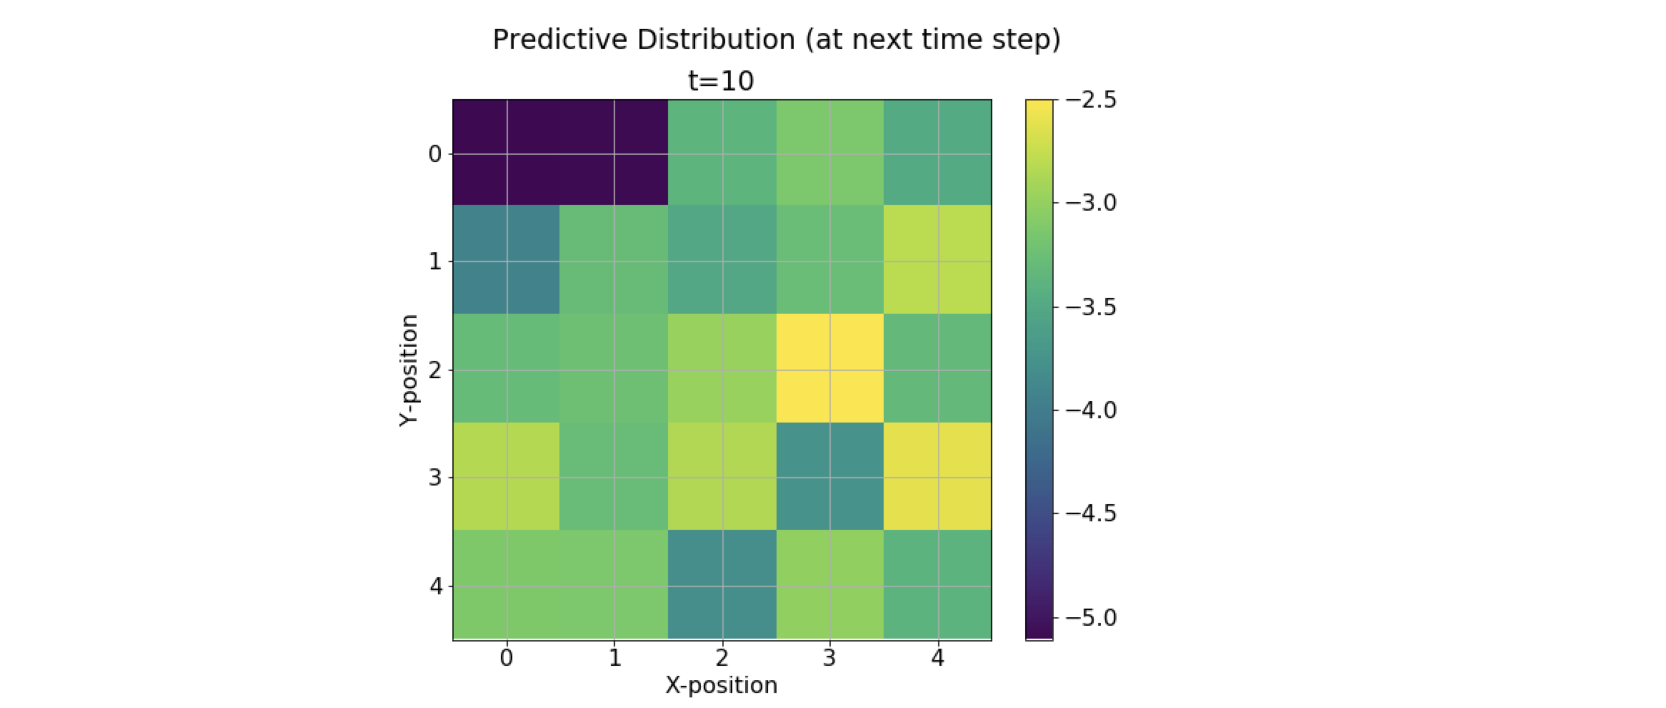 Prediction log-likelihood probabilities at the next time step (t = 10) using all evidence